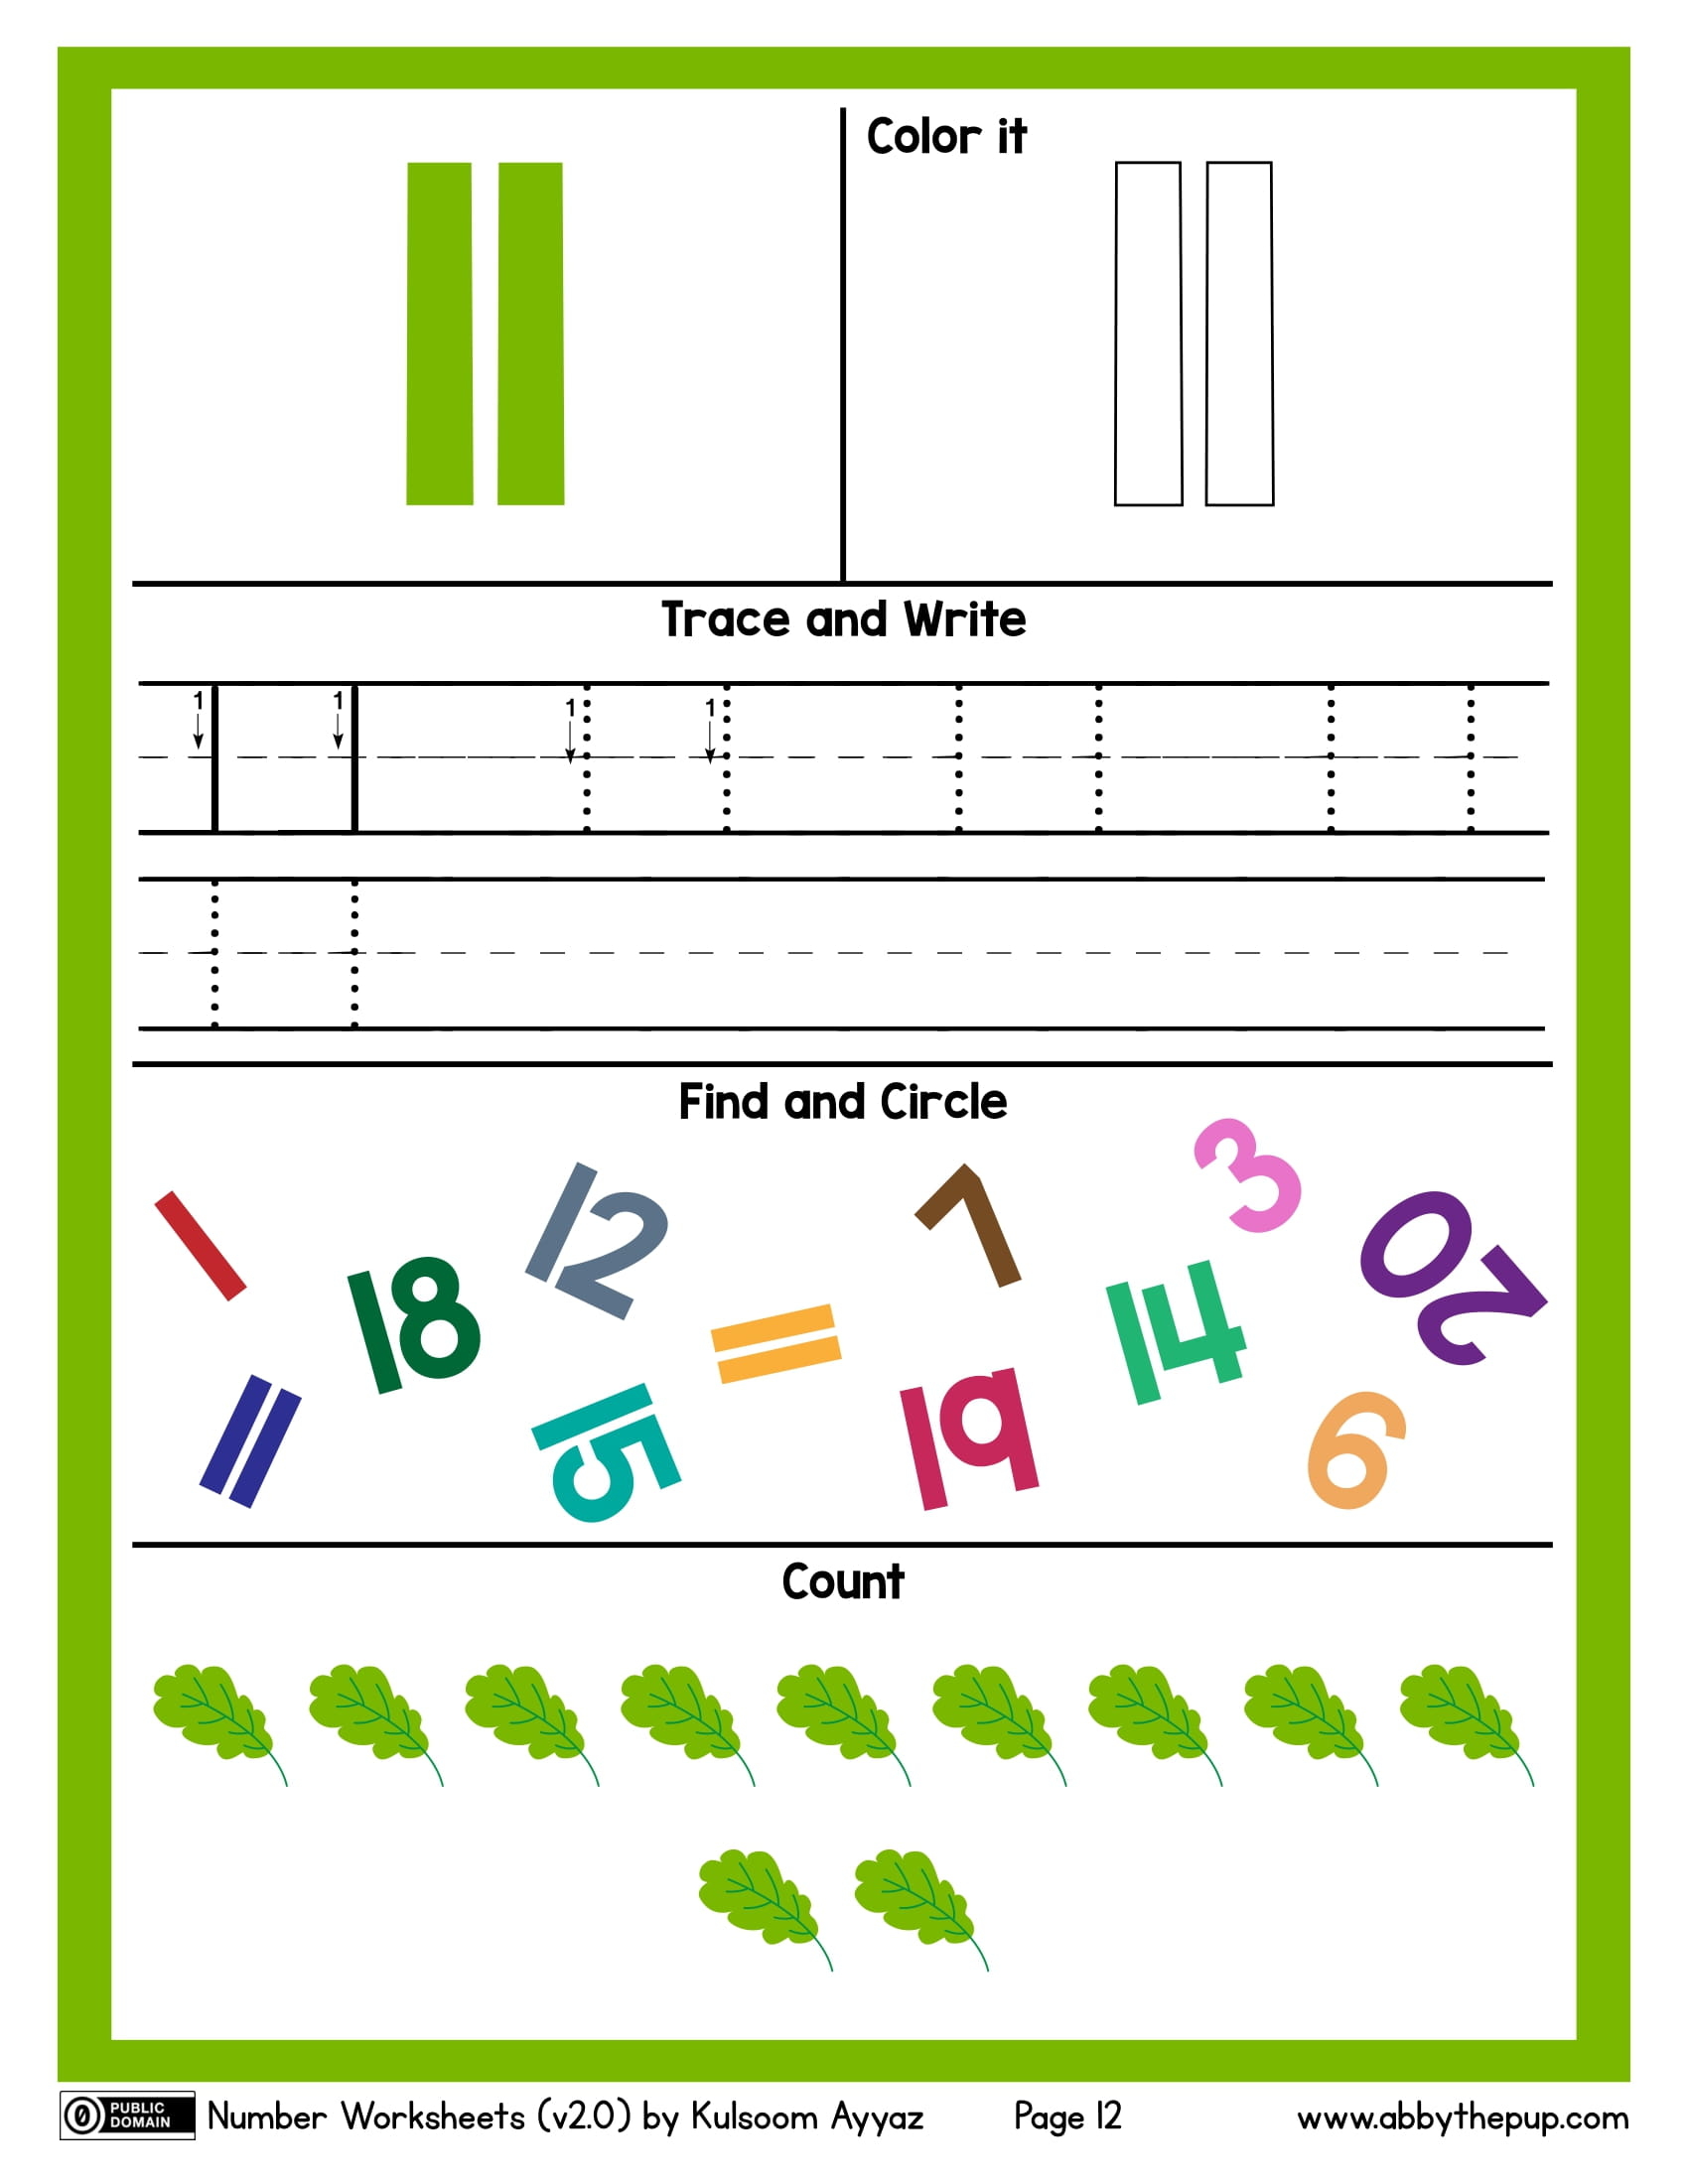 Number color trace write find and count worksheet free printable puzzle games